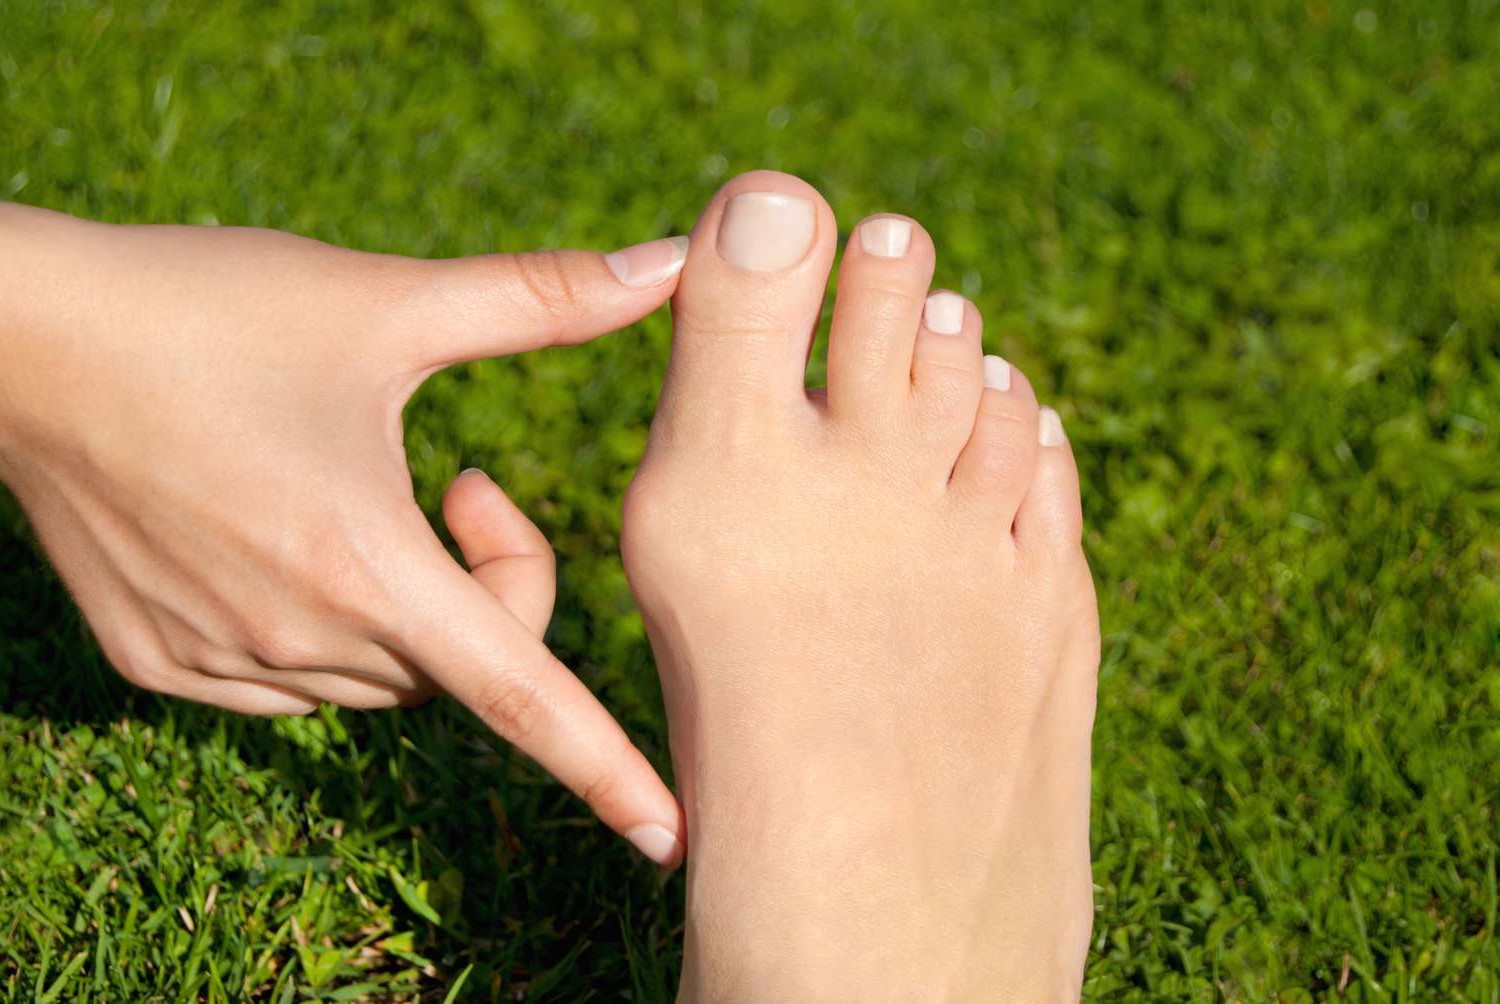 How To Shrink Bunions Naturally